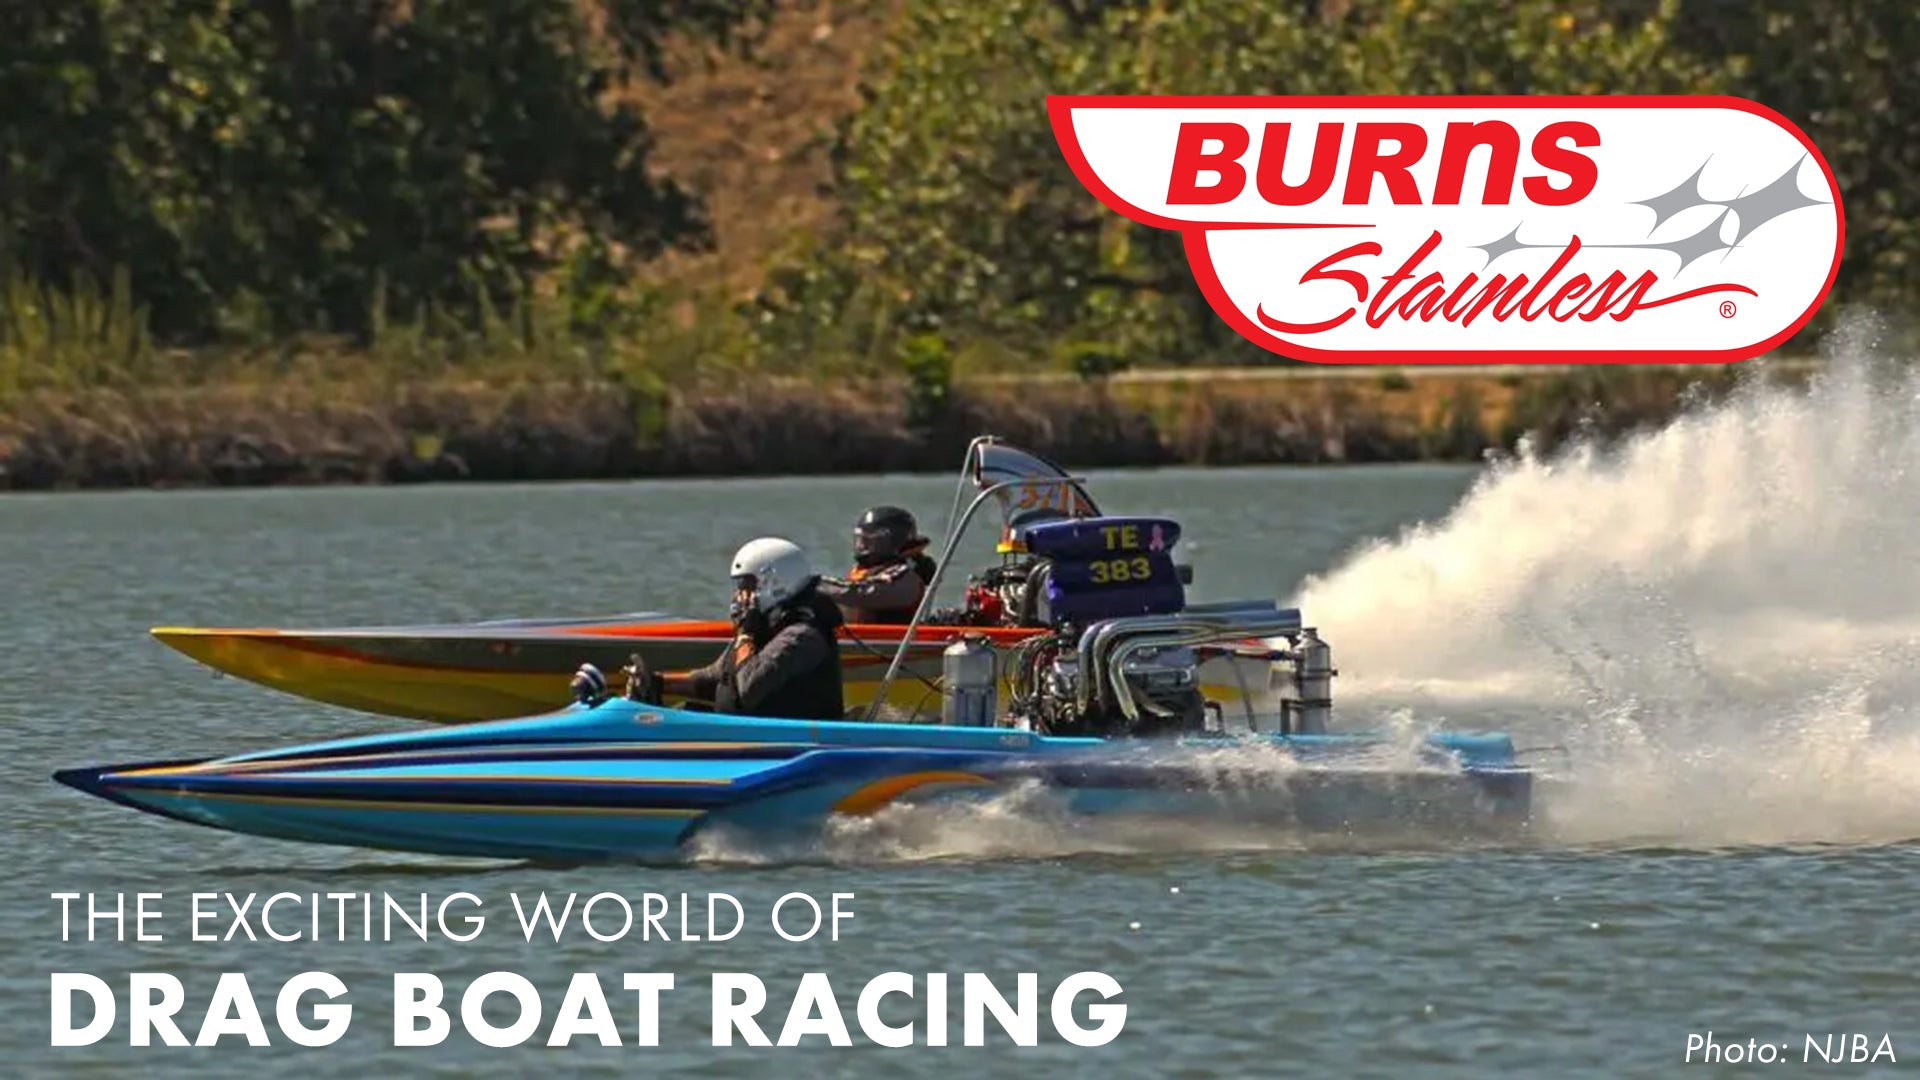 The Exciting World of Drag Boat Racing